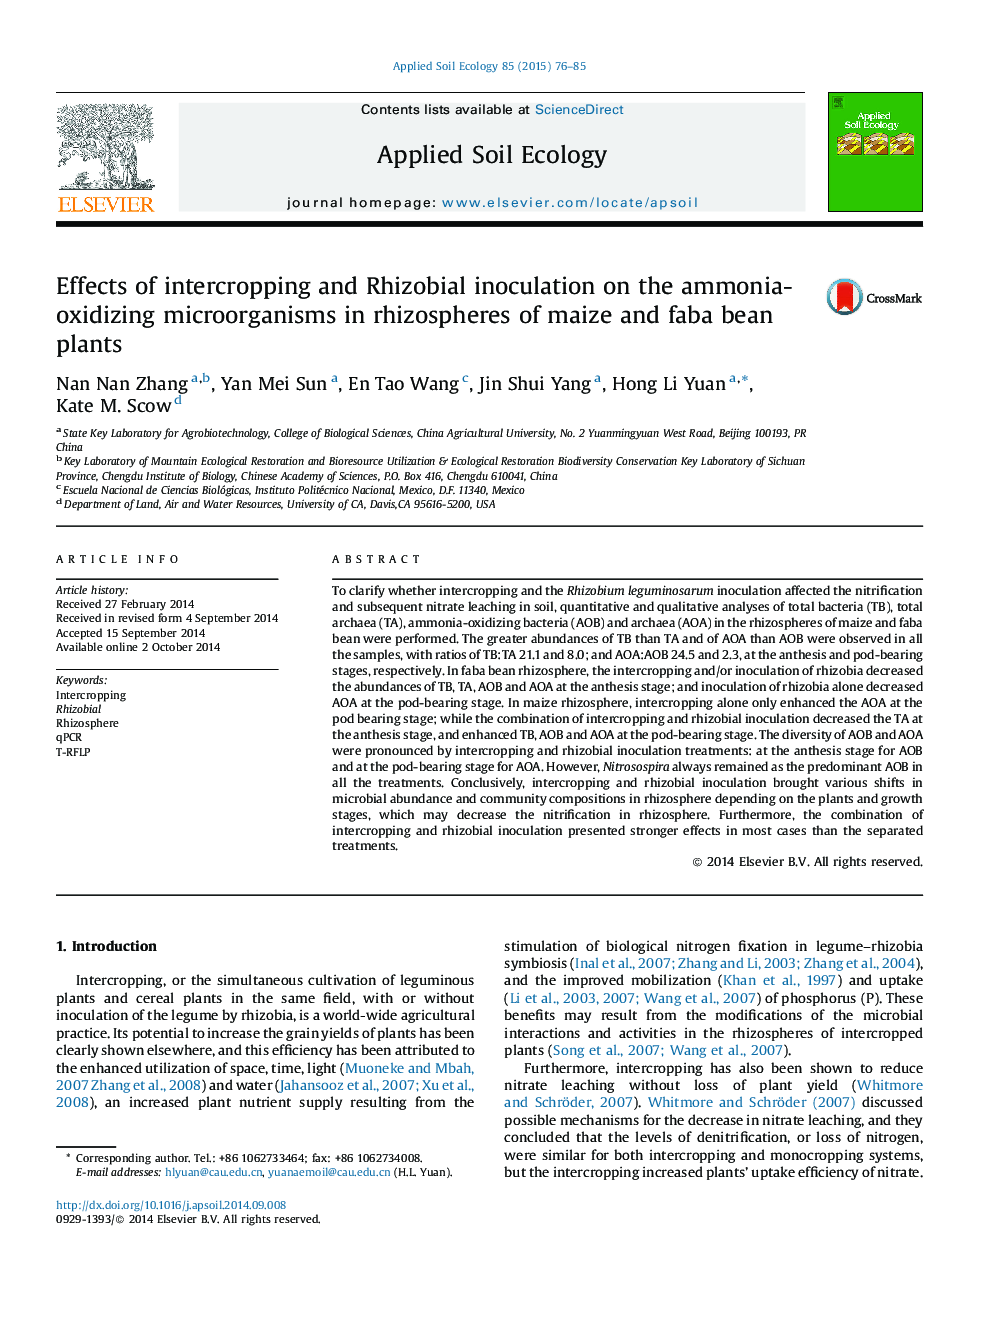 Effects of intercropping and Rhizobial inoculation on the ammonia-oxidizing microorganisms in rhizospheres of maize and faba bean plants